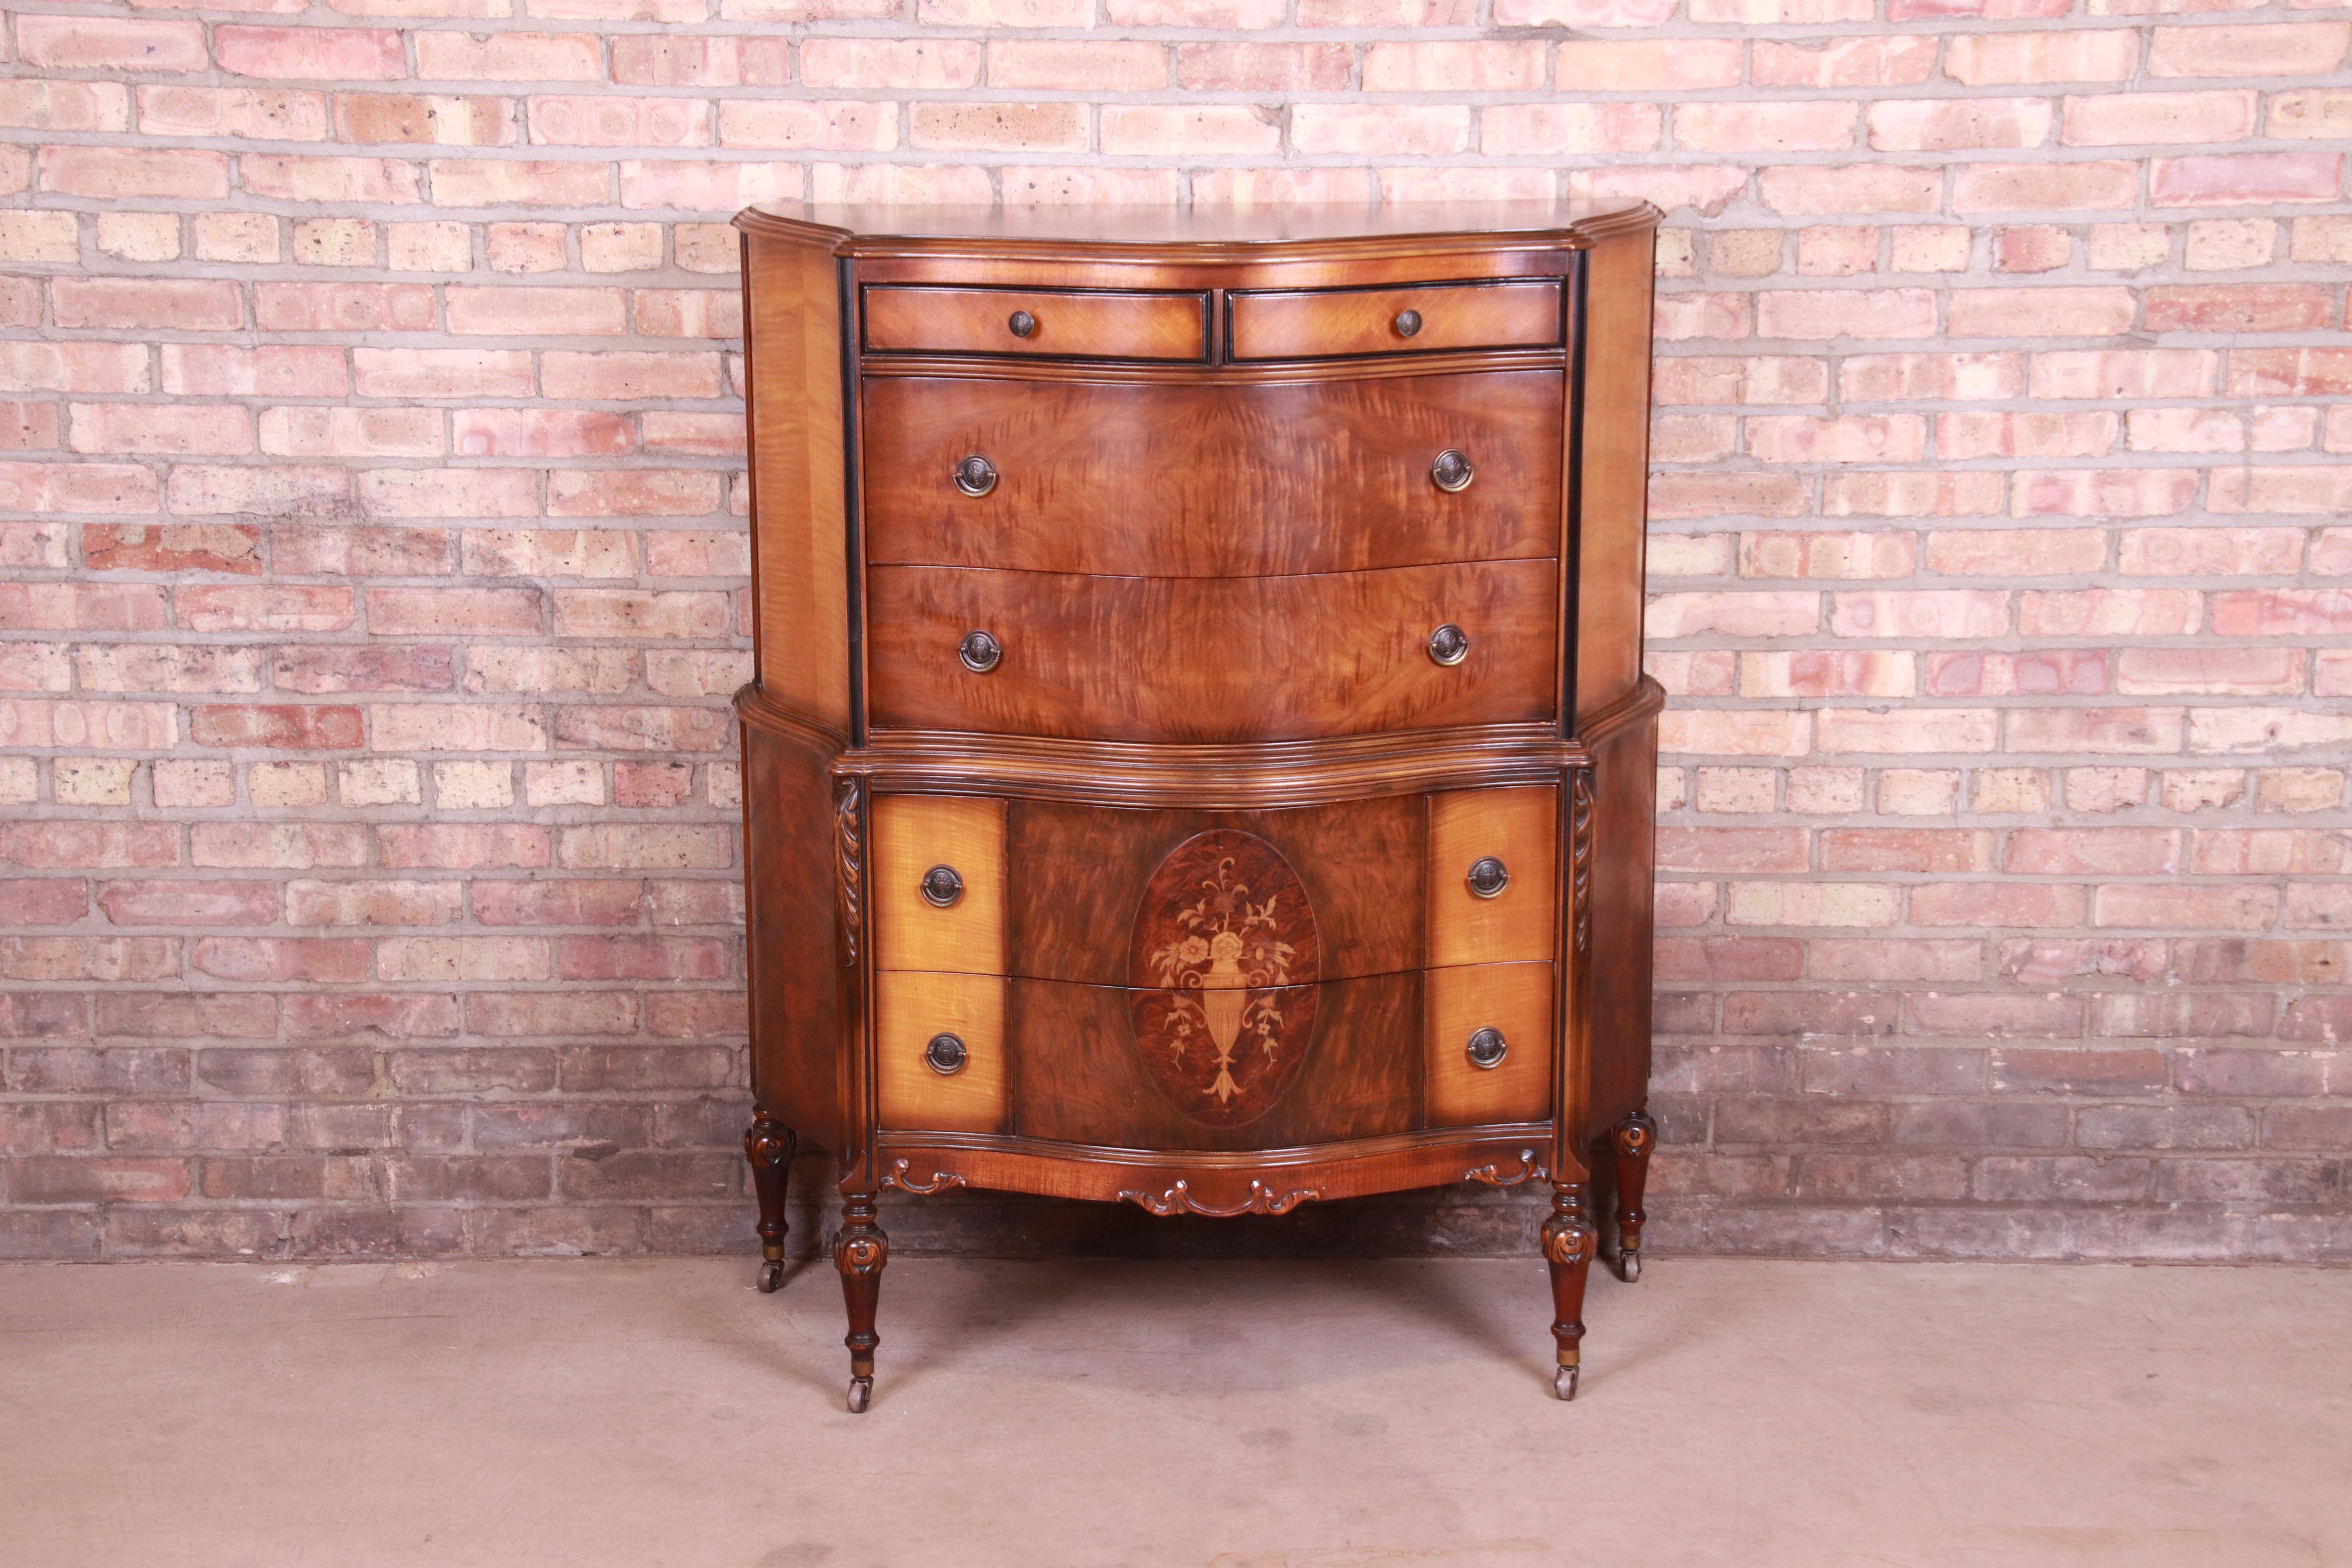 A gorgeous antique Art Deco six-drawer highboy dresser

In the manner of Widdicomb,

USA, Circa 1920s

Burled walnut and satinwood, with inlaid floral marquetry and original brass hardware.

Measures: 41